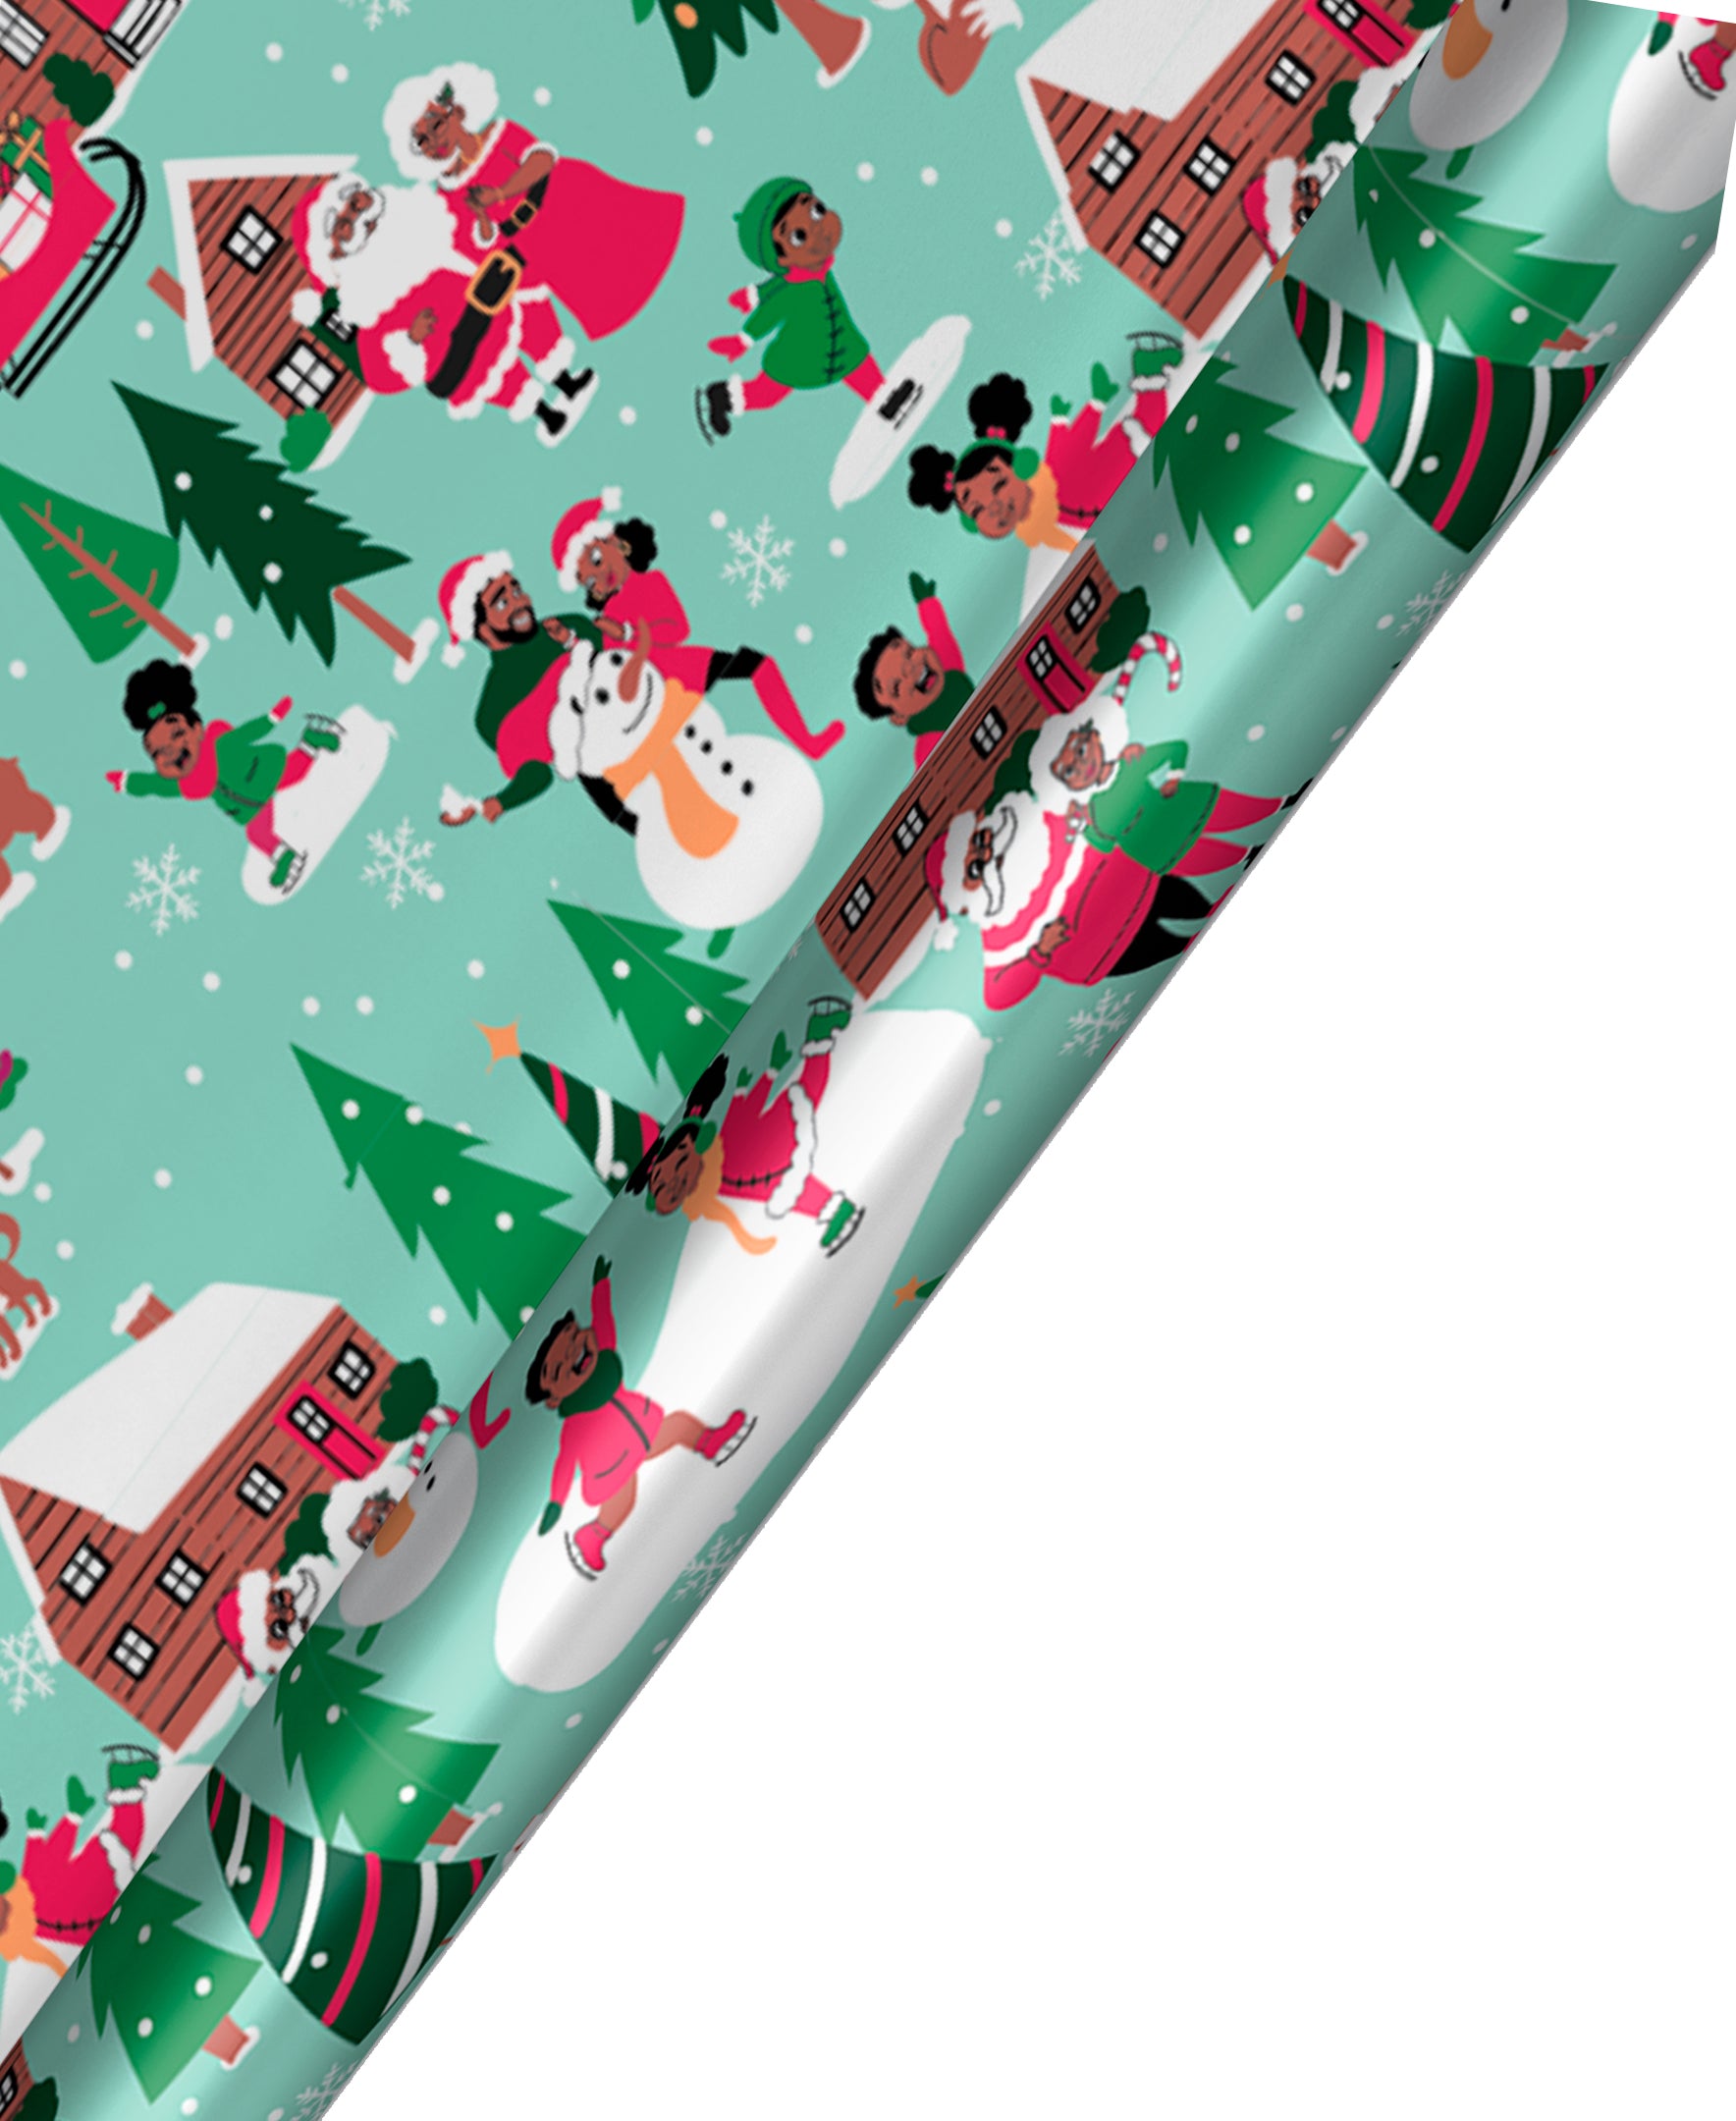 Fdelink Christmas Gift Wrapping Paper Clearance Christmas Wrapping Paper Christmas Gifts Christmas Wrapping Paper 20''*27.5'' Santa Merry Christmas